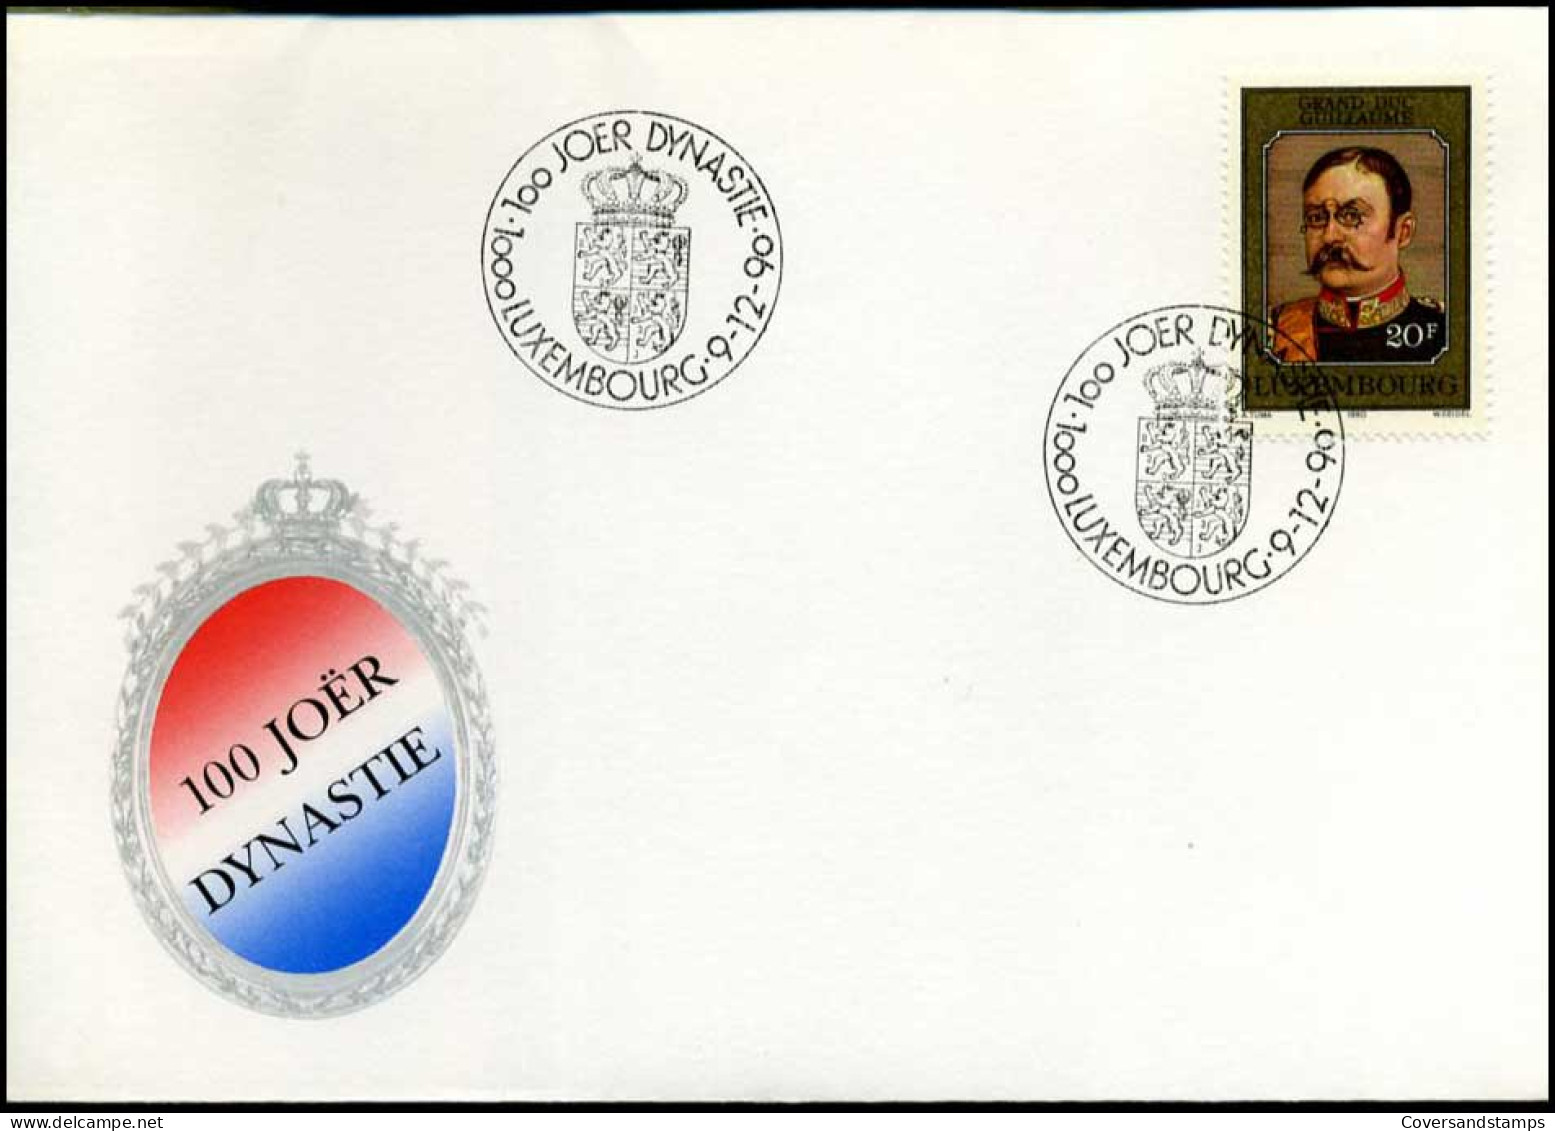 Luxembourg - FDC - Grand-Duc Guillaume - FDC